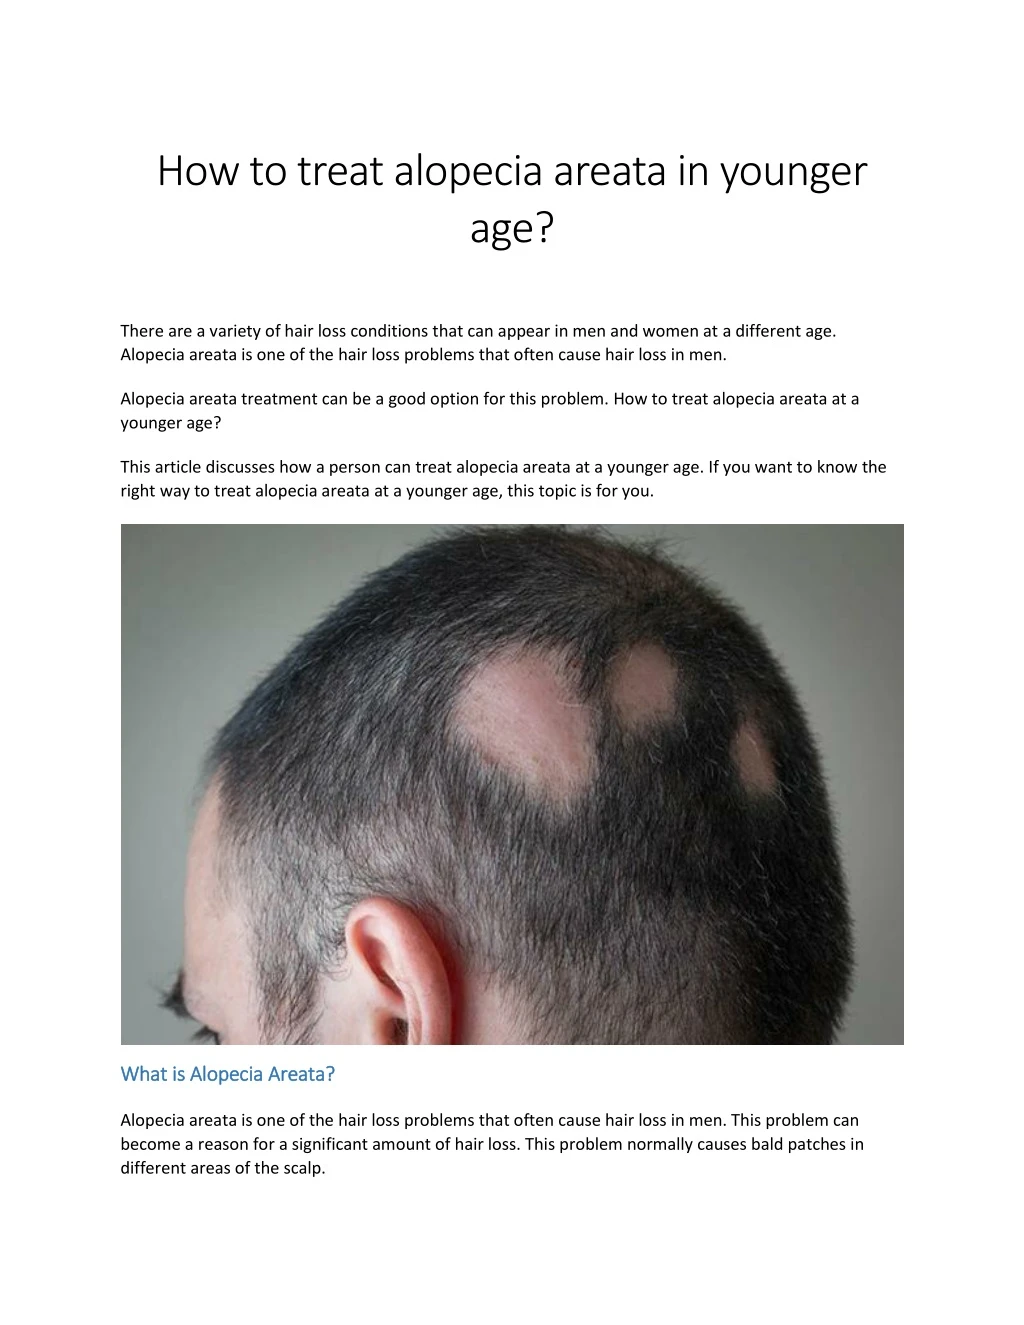 how to treat alopecia areata in younger age